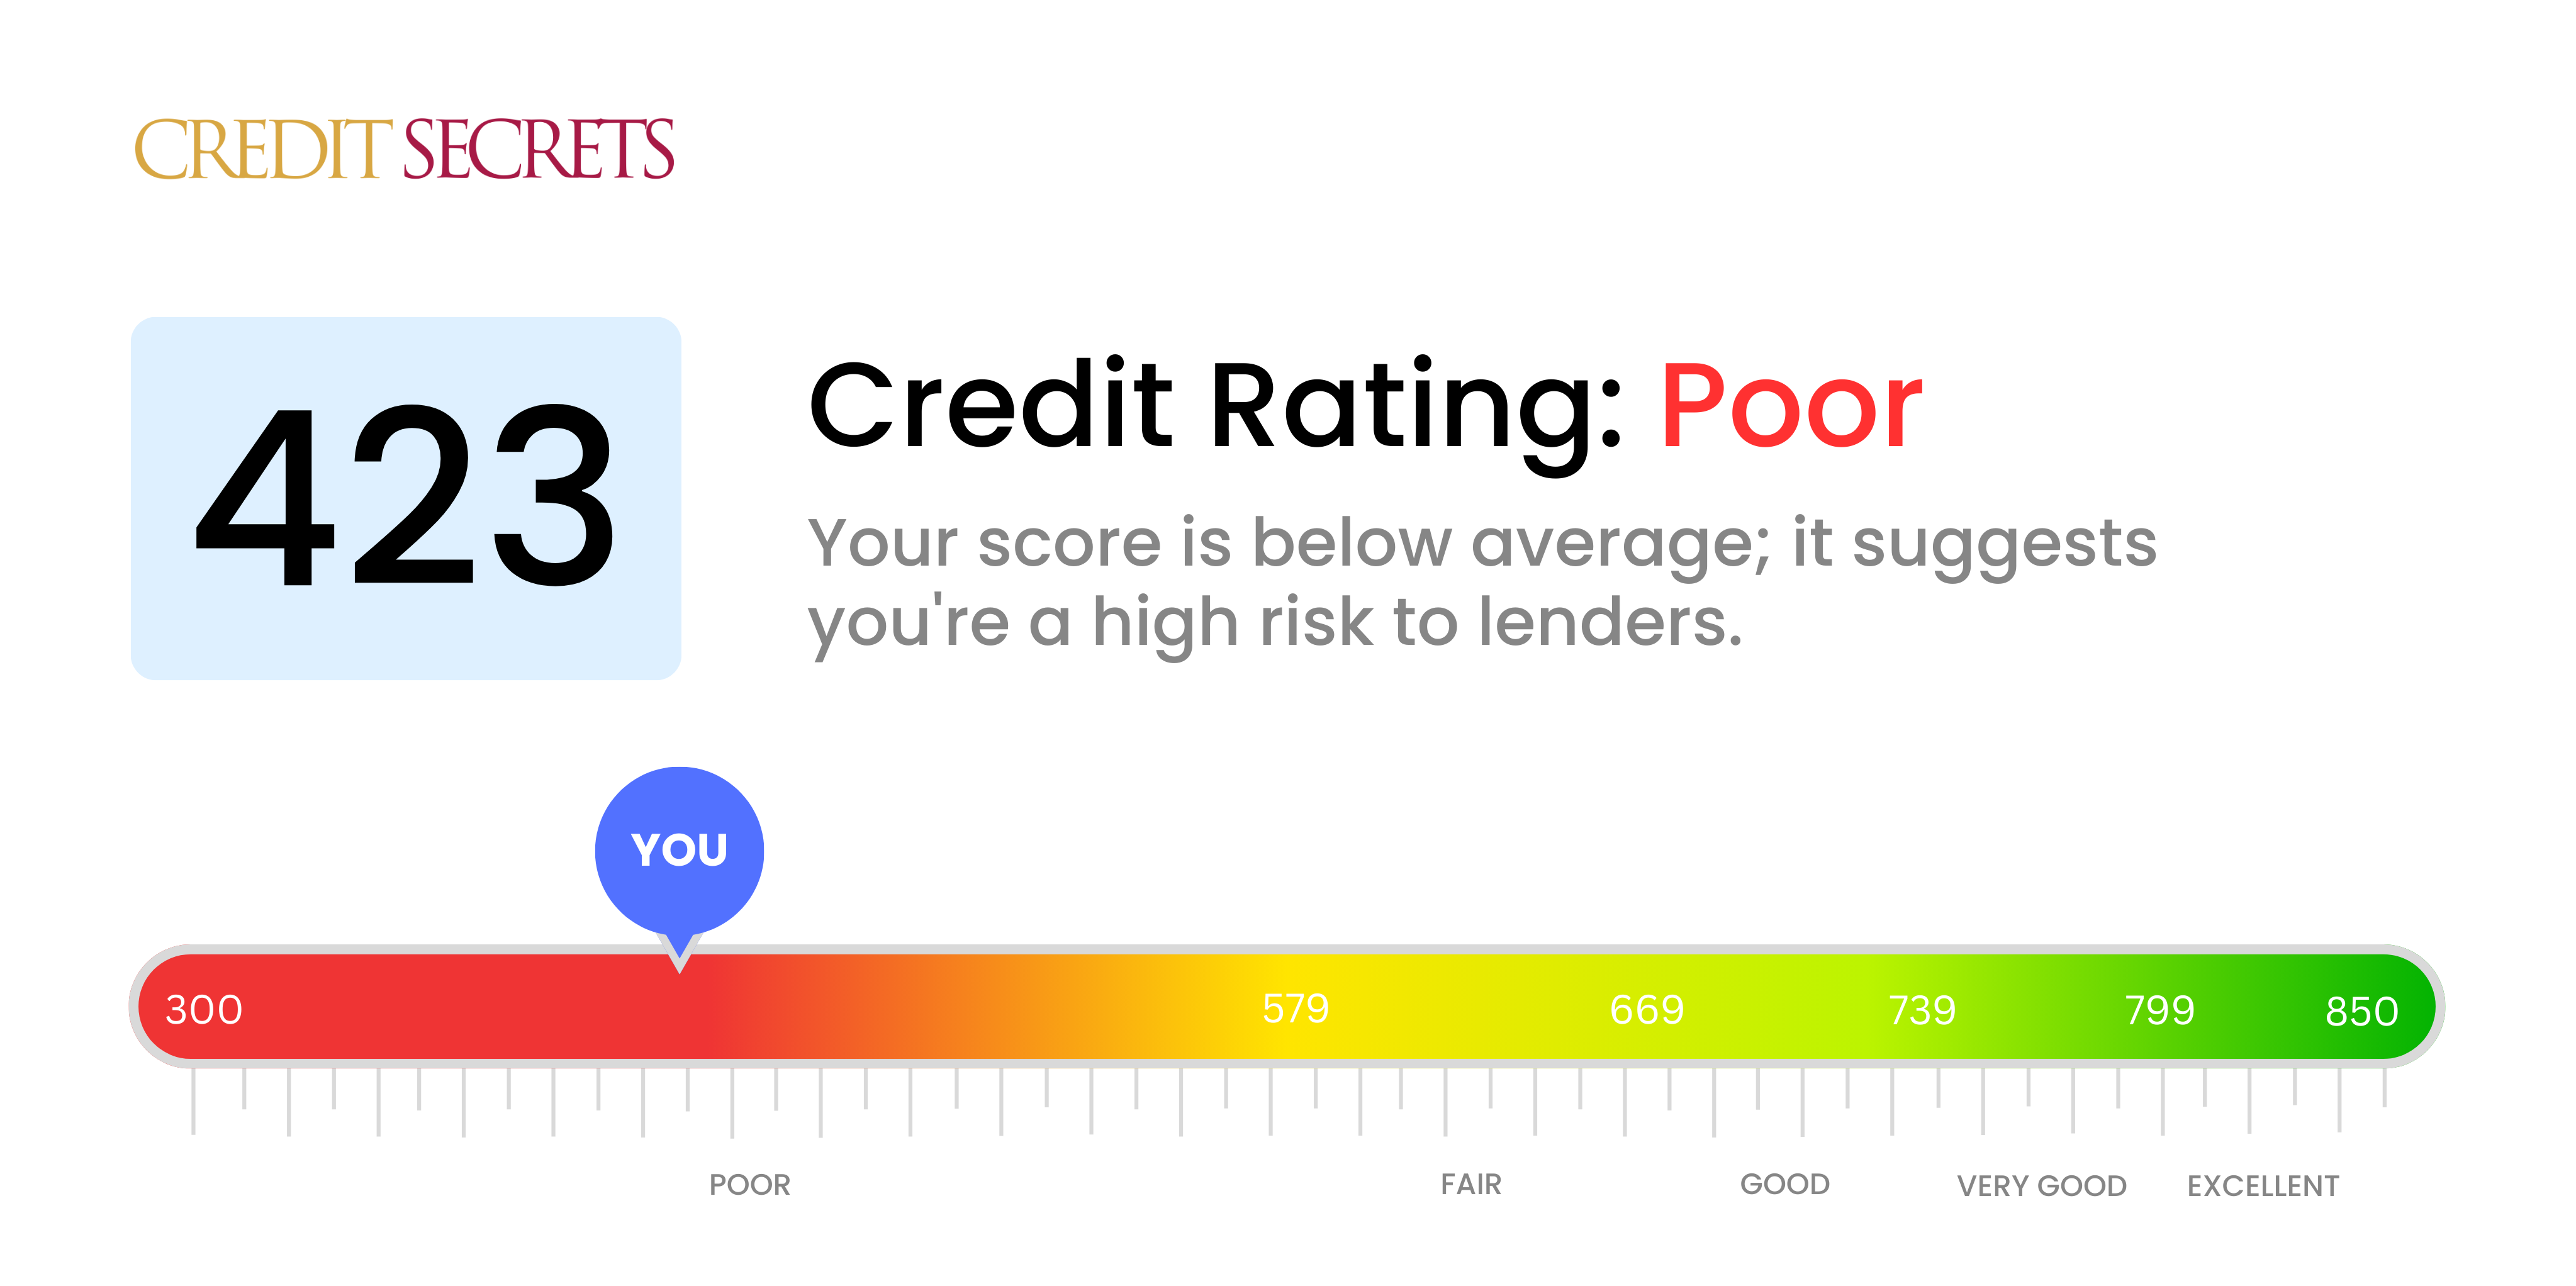 Is 423 a good credit score?